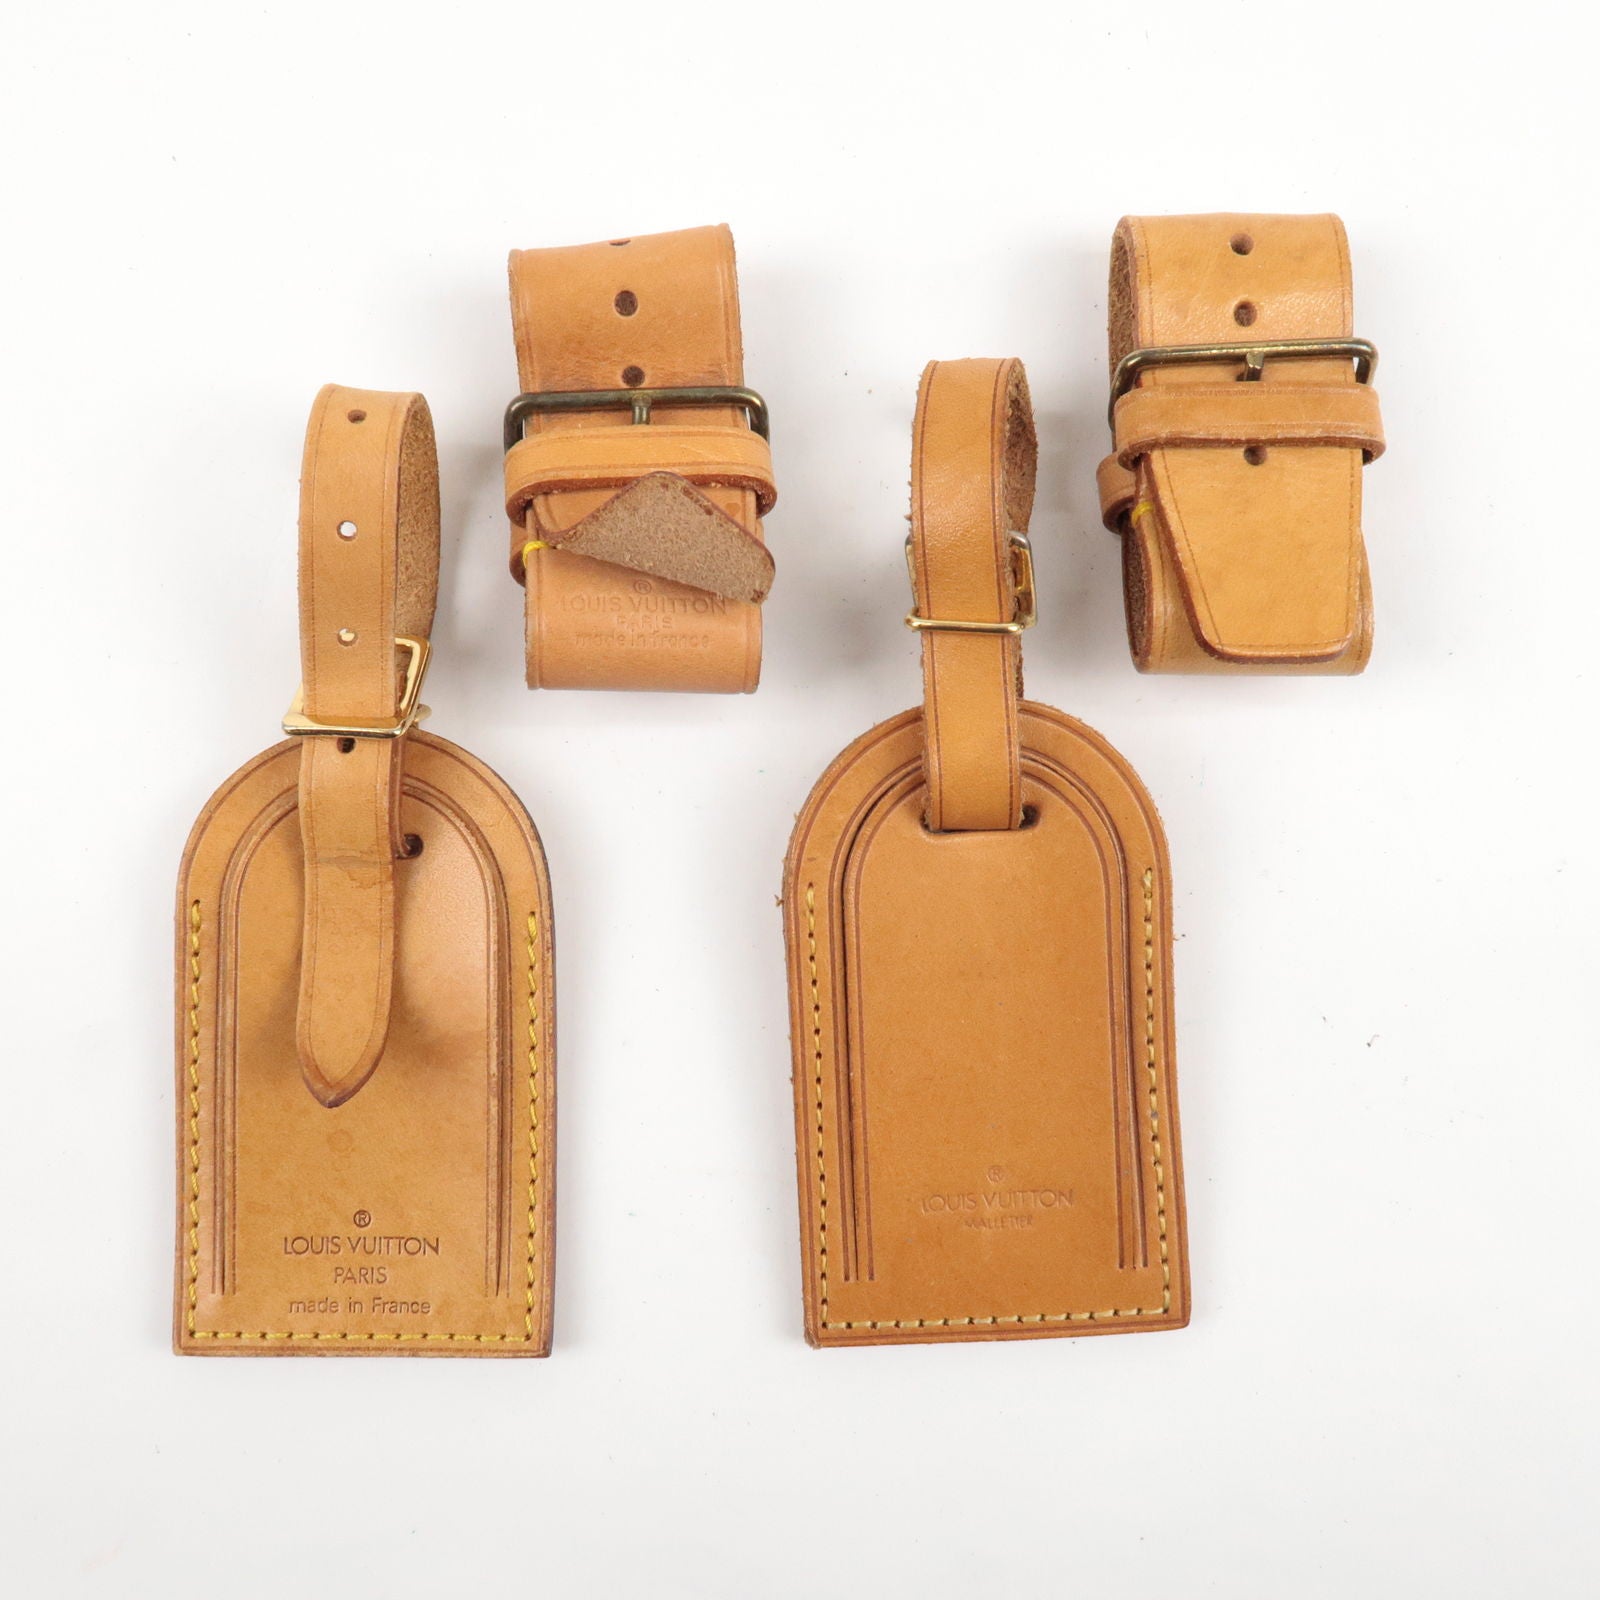 Louis Vuitton Luggage Tag And Poignet Made In France